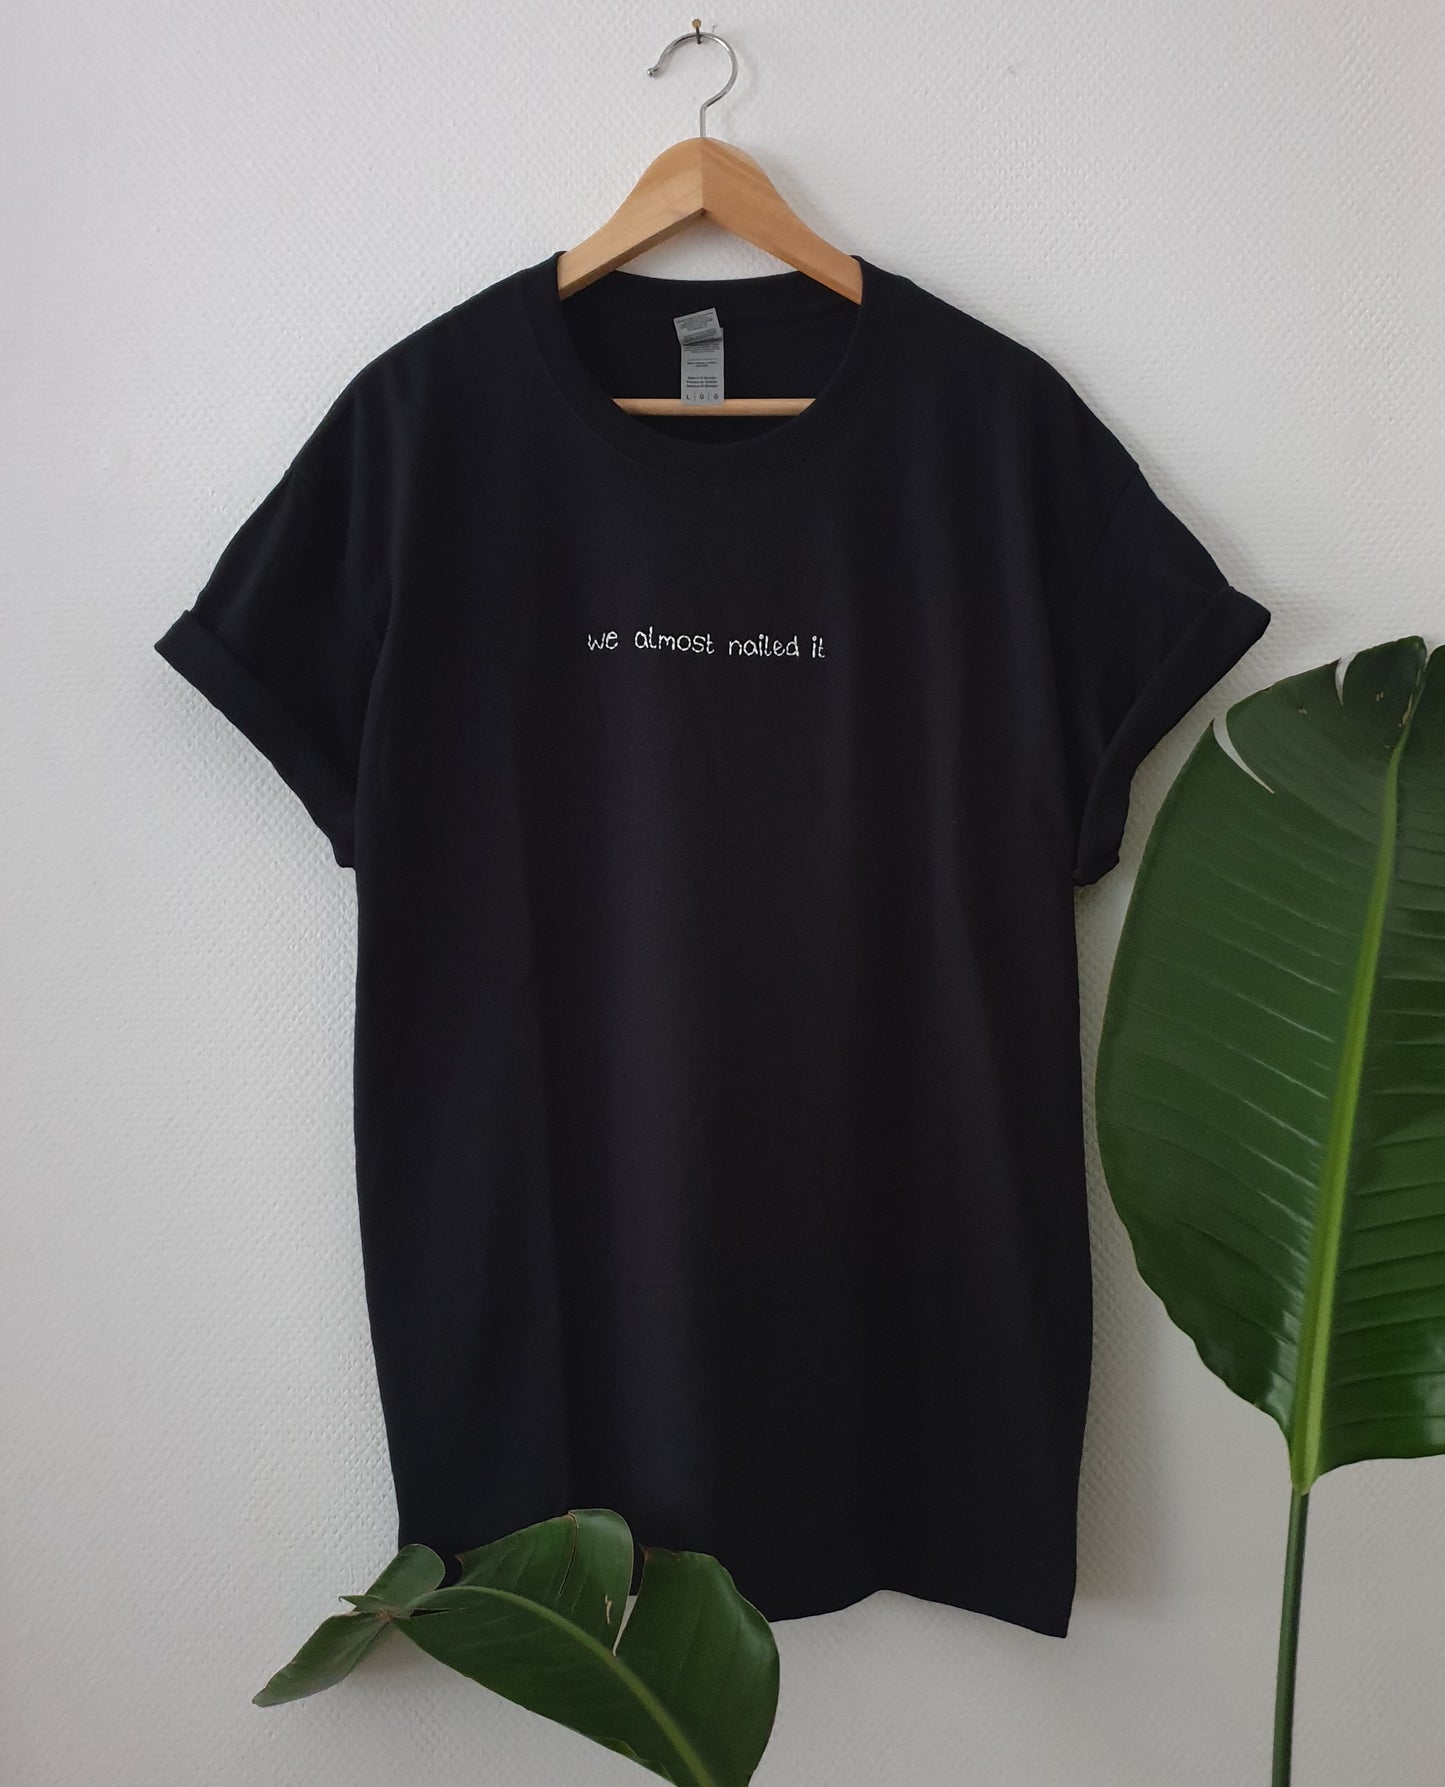 Hand Embroidered Text Shirt